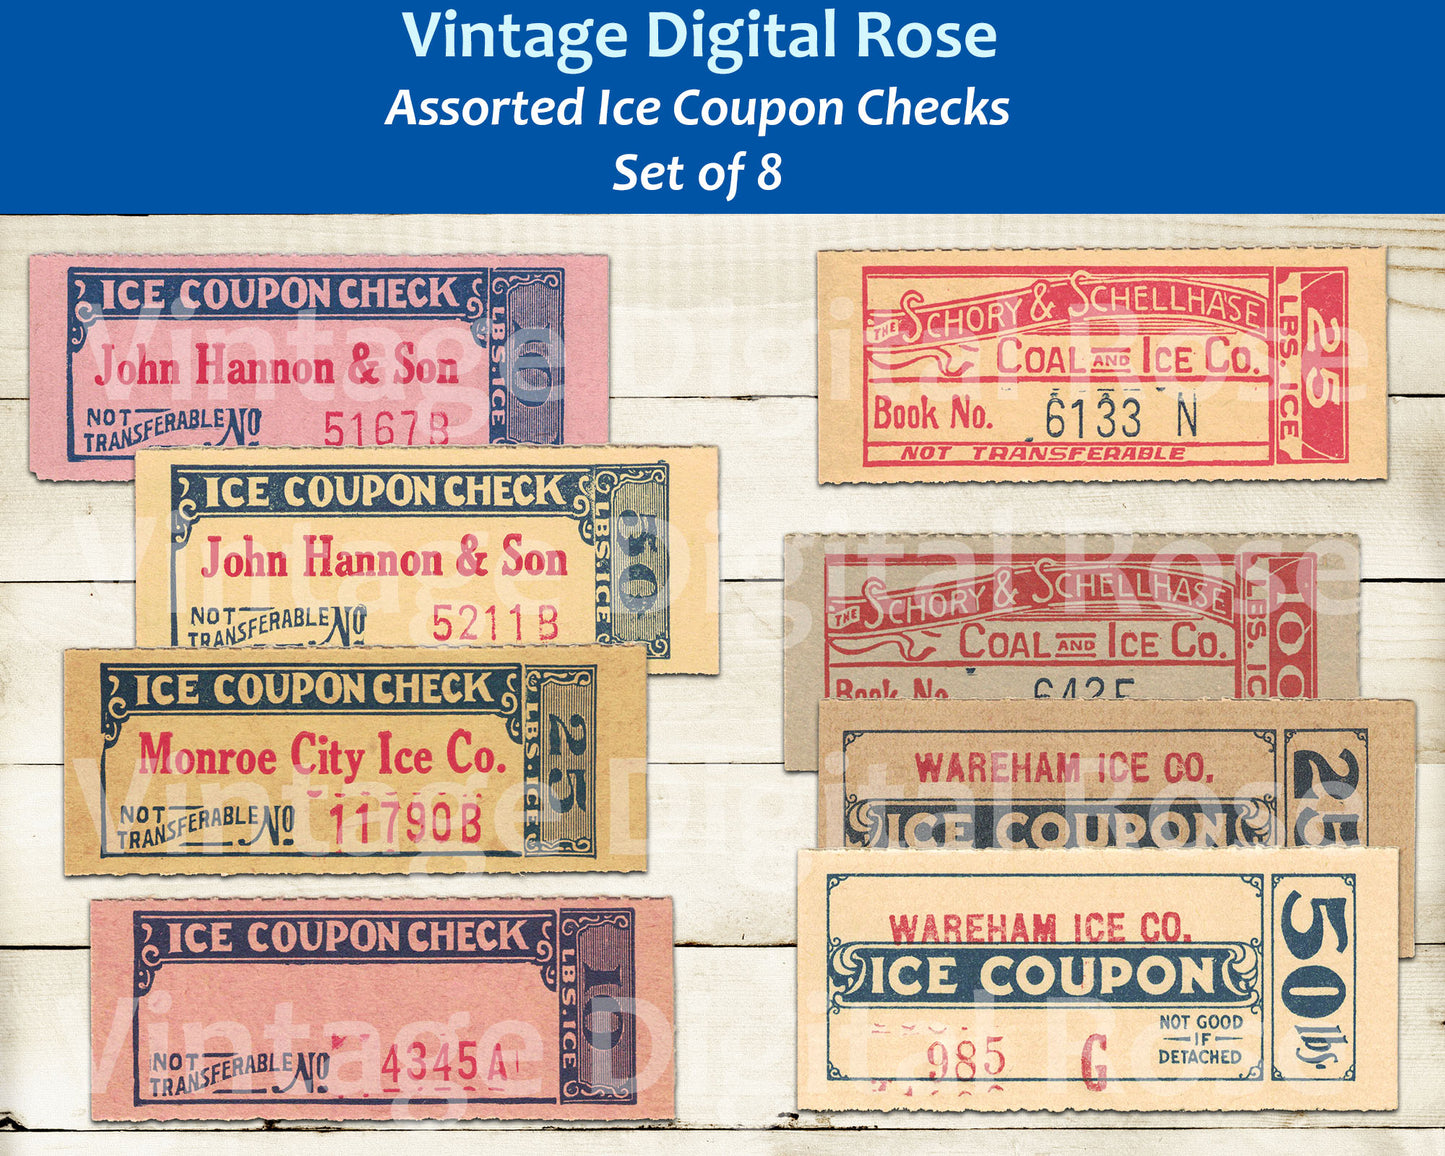 Vintage Printable Ice Coupon Checks Assorted Colors Digital Collage Sheet JPG PNG Format Set of 8 Eight Tickets Vintage Ephemera